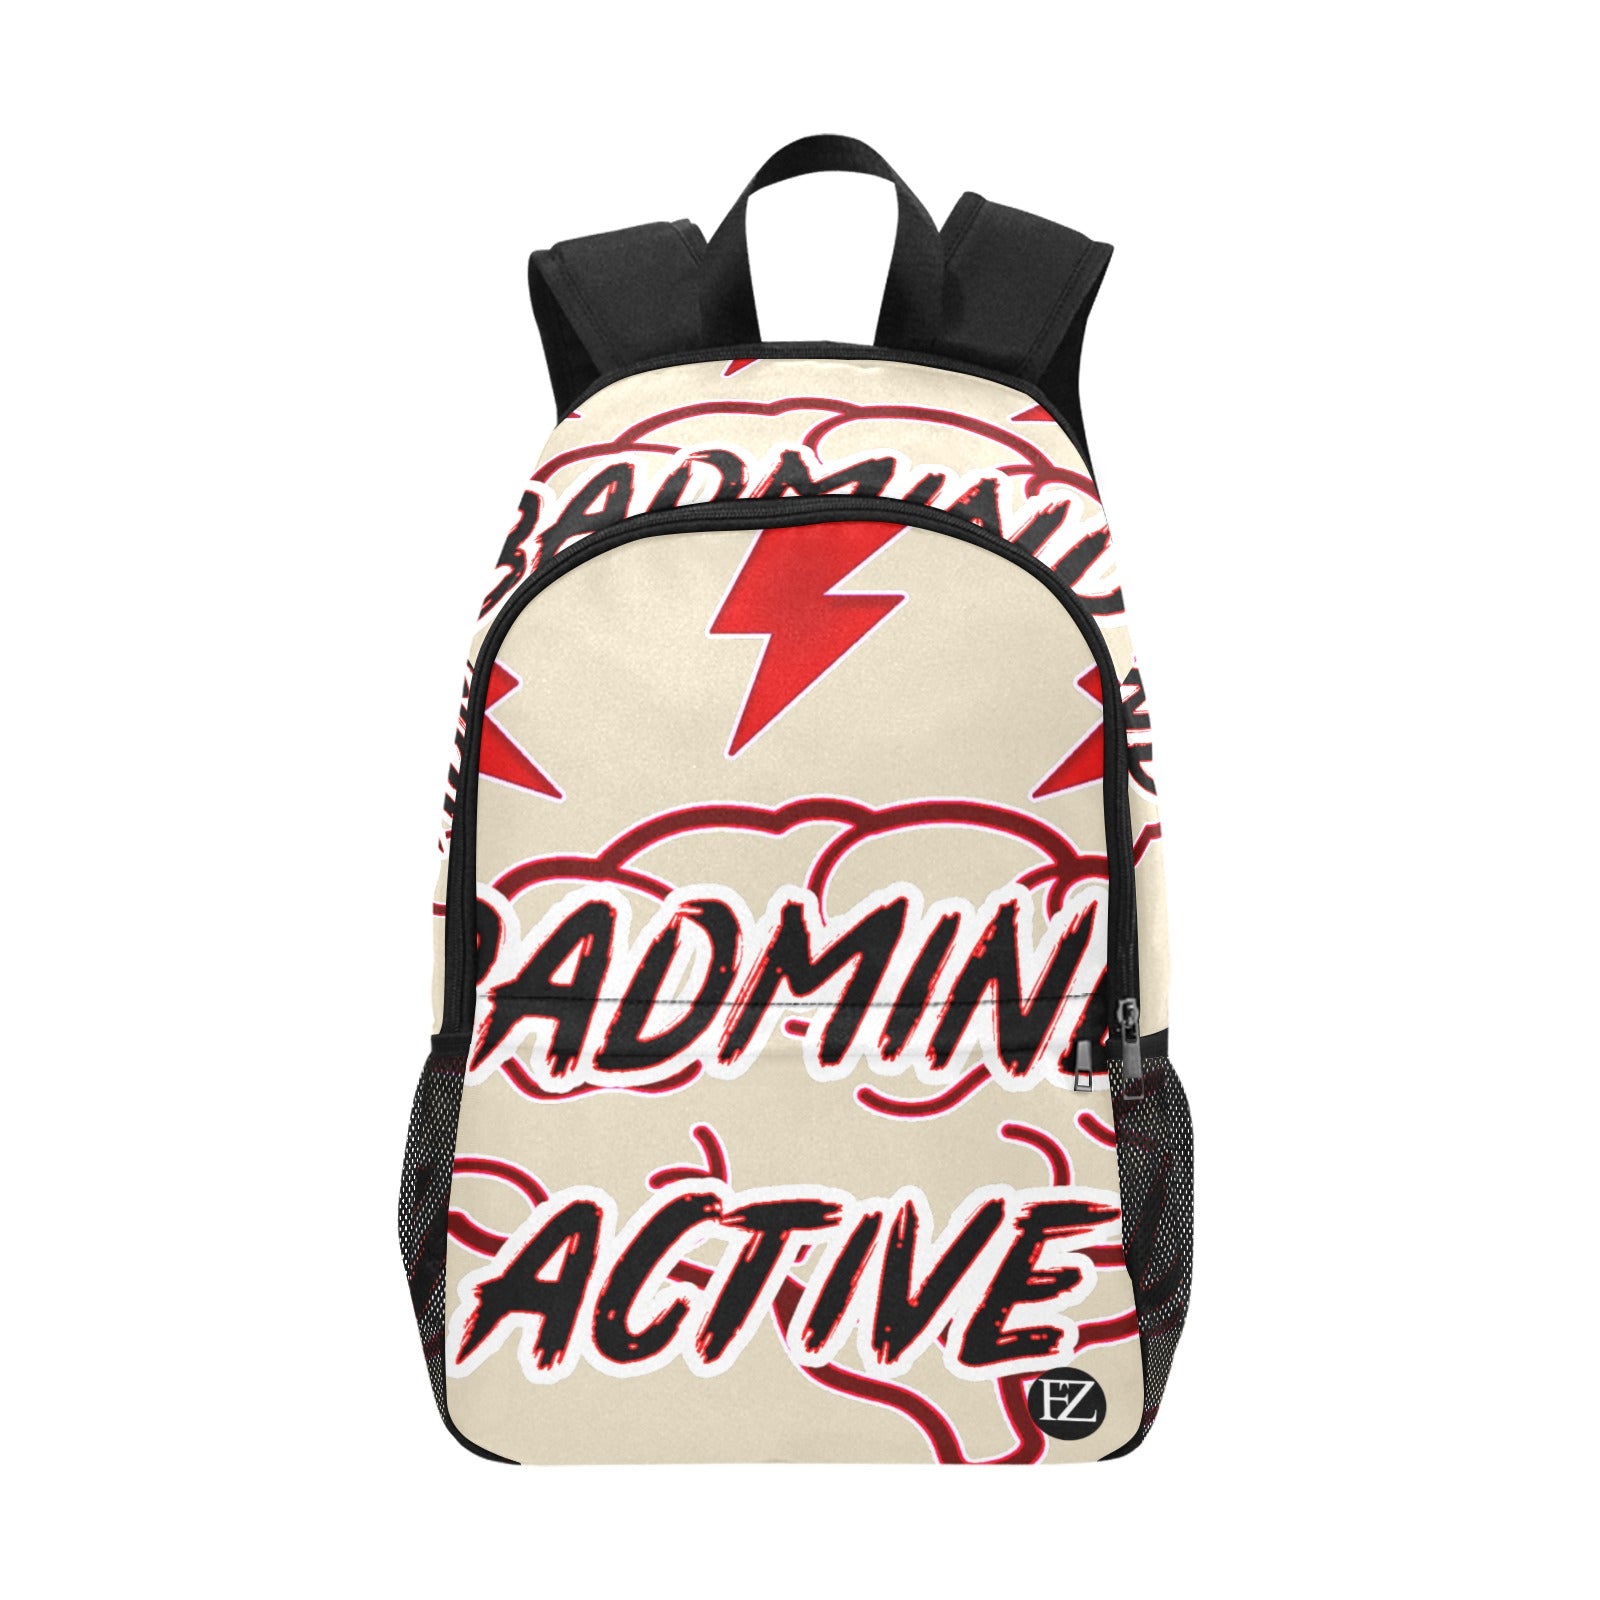 fz mind backpack one size / fz mind backpack - creme all-over print unisex casual backpack with side mesh pockets (model 1659)